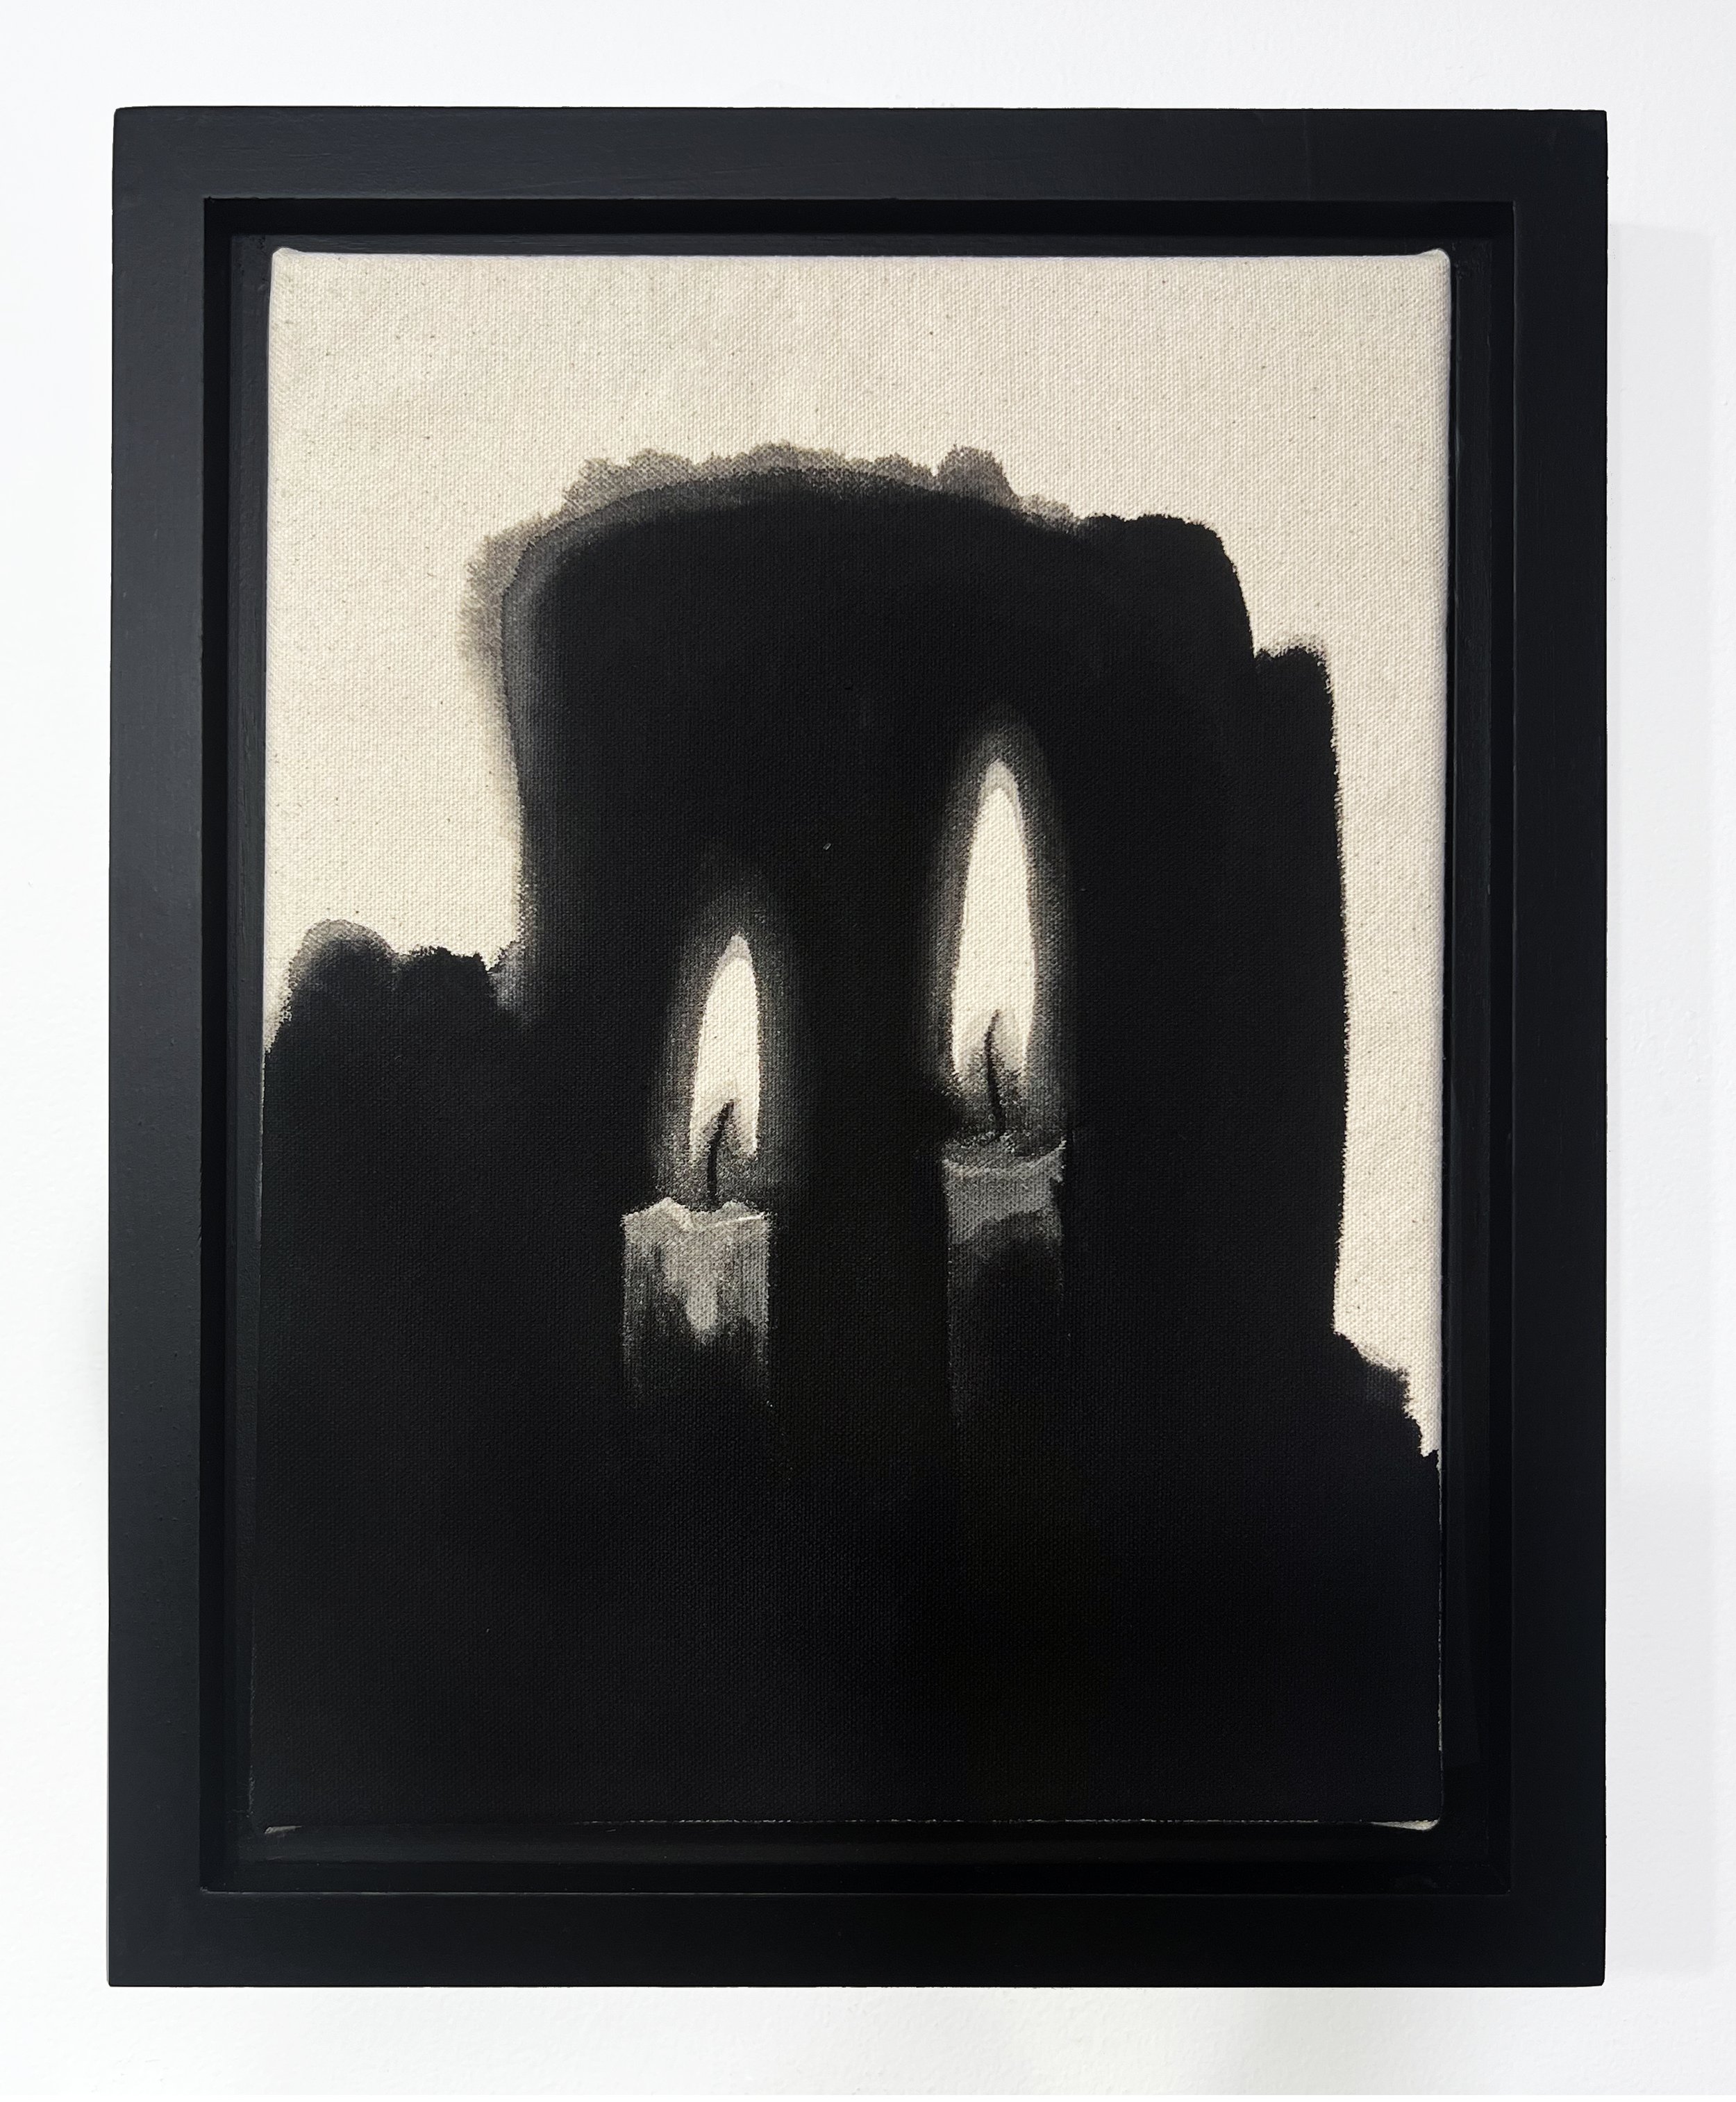   Untitled (candlelight) , from Transcendental Series, 2022 Black gesso on raw canvas 9 x 12 inches (23cm x 30.5cm) 